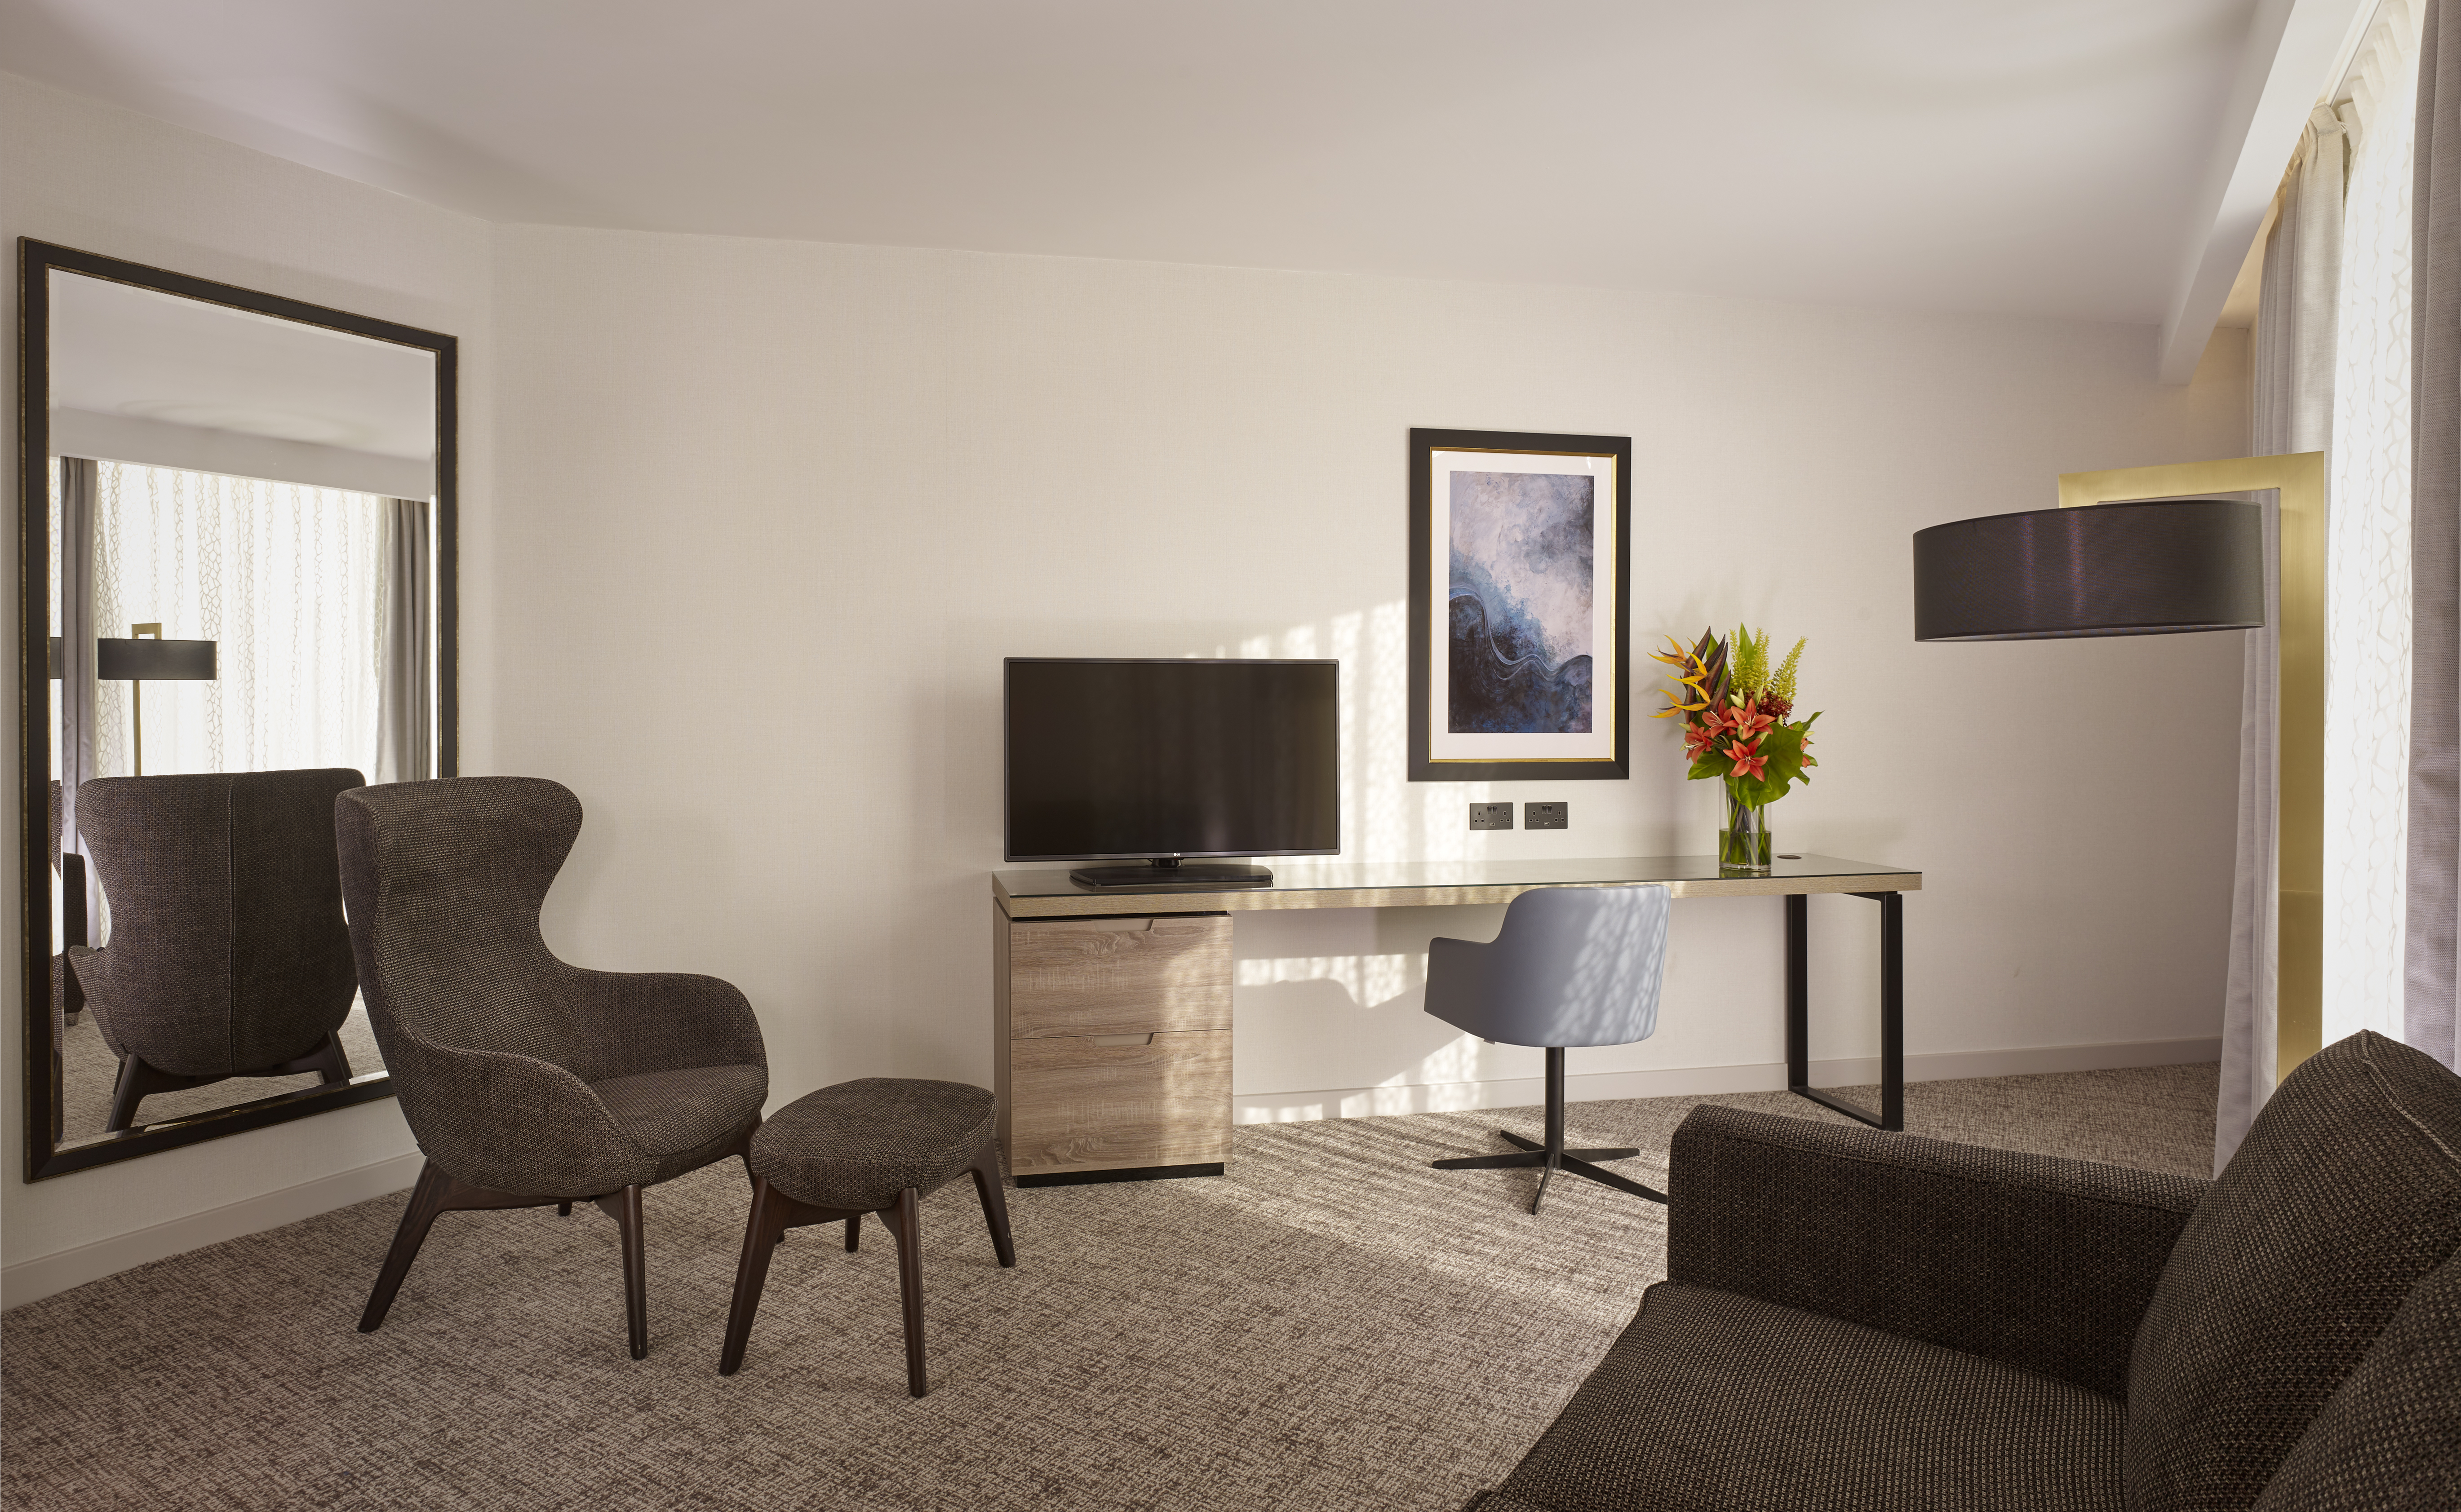 Living Area of Guest Suite with Large Windows and Natural Light coming in, a Floor to Ceiling Mirror, HDTV, Gray Chair for Natural Wood Desk